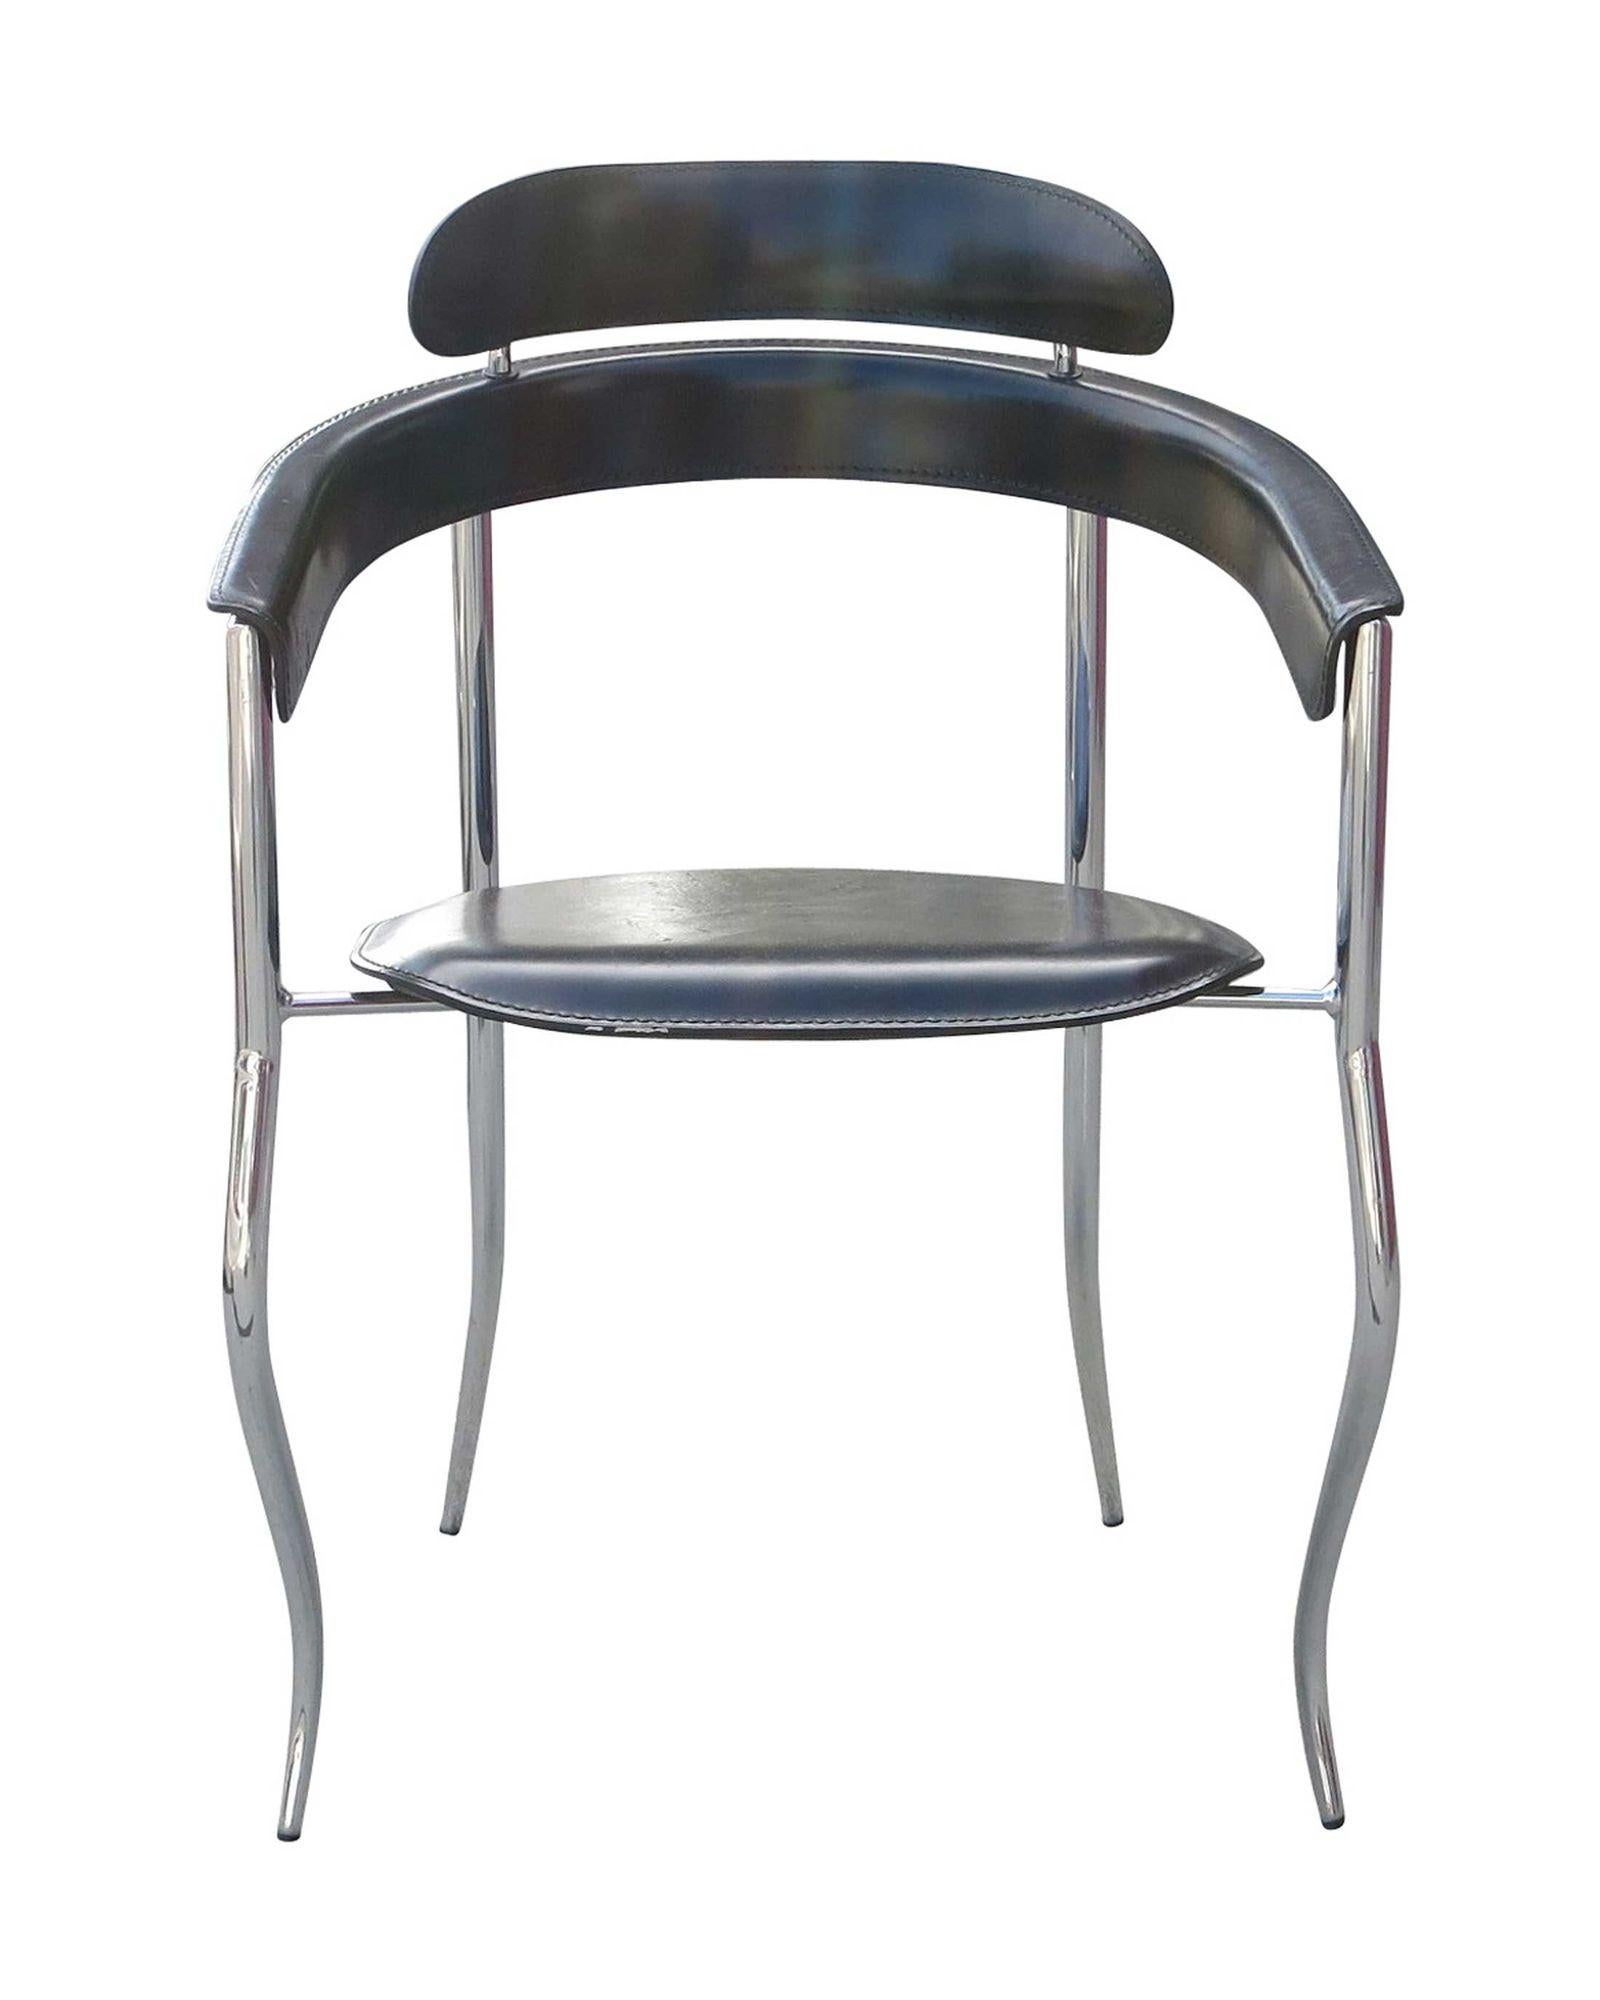 American Set of Four Stiletto Architectural Chairs by Arrben, Italy